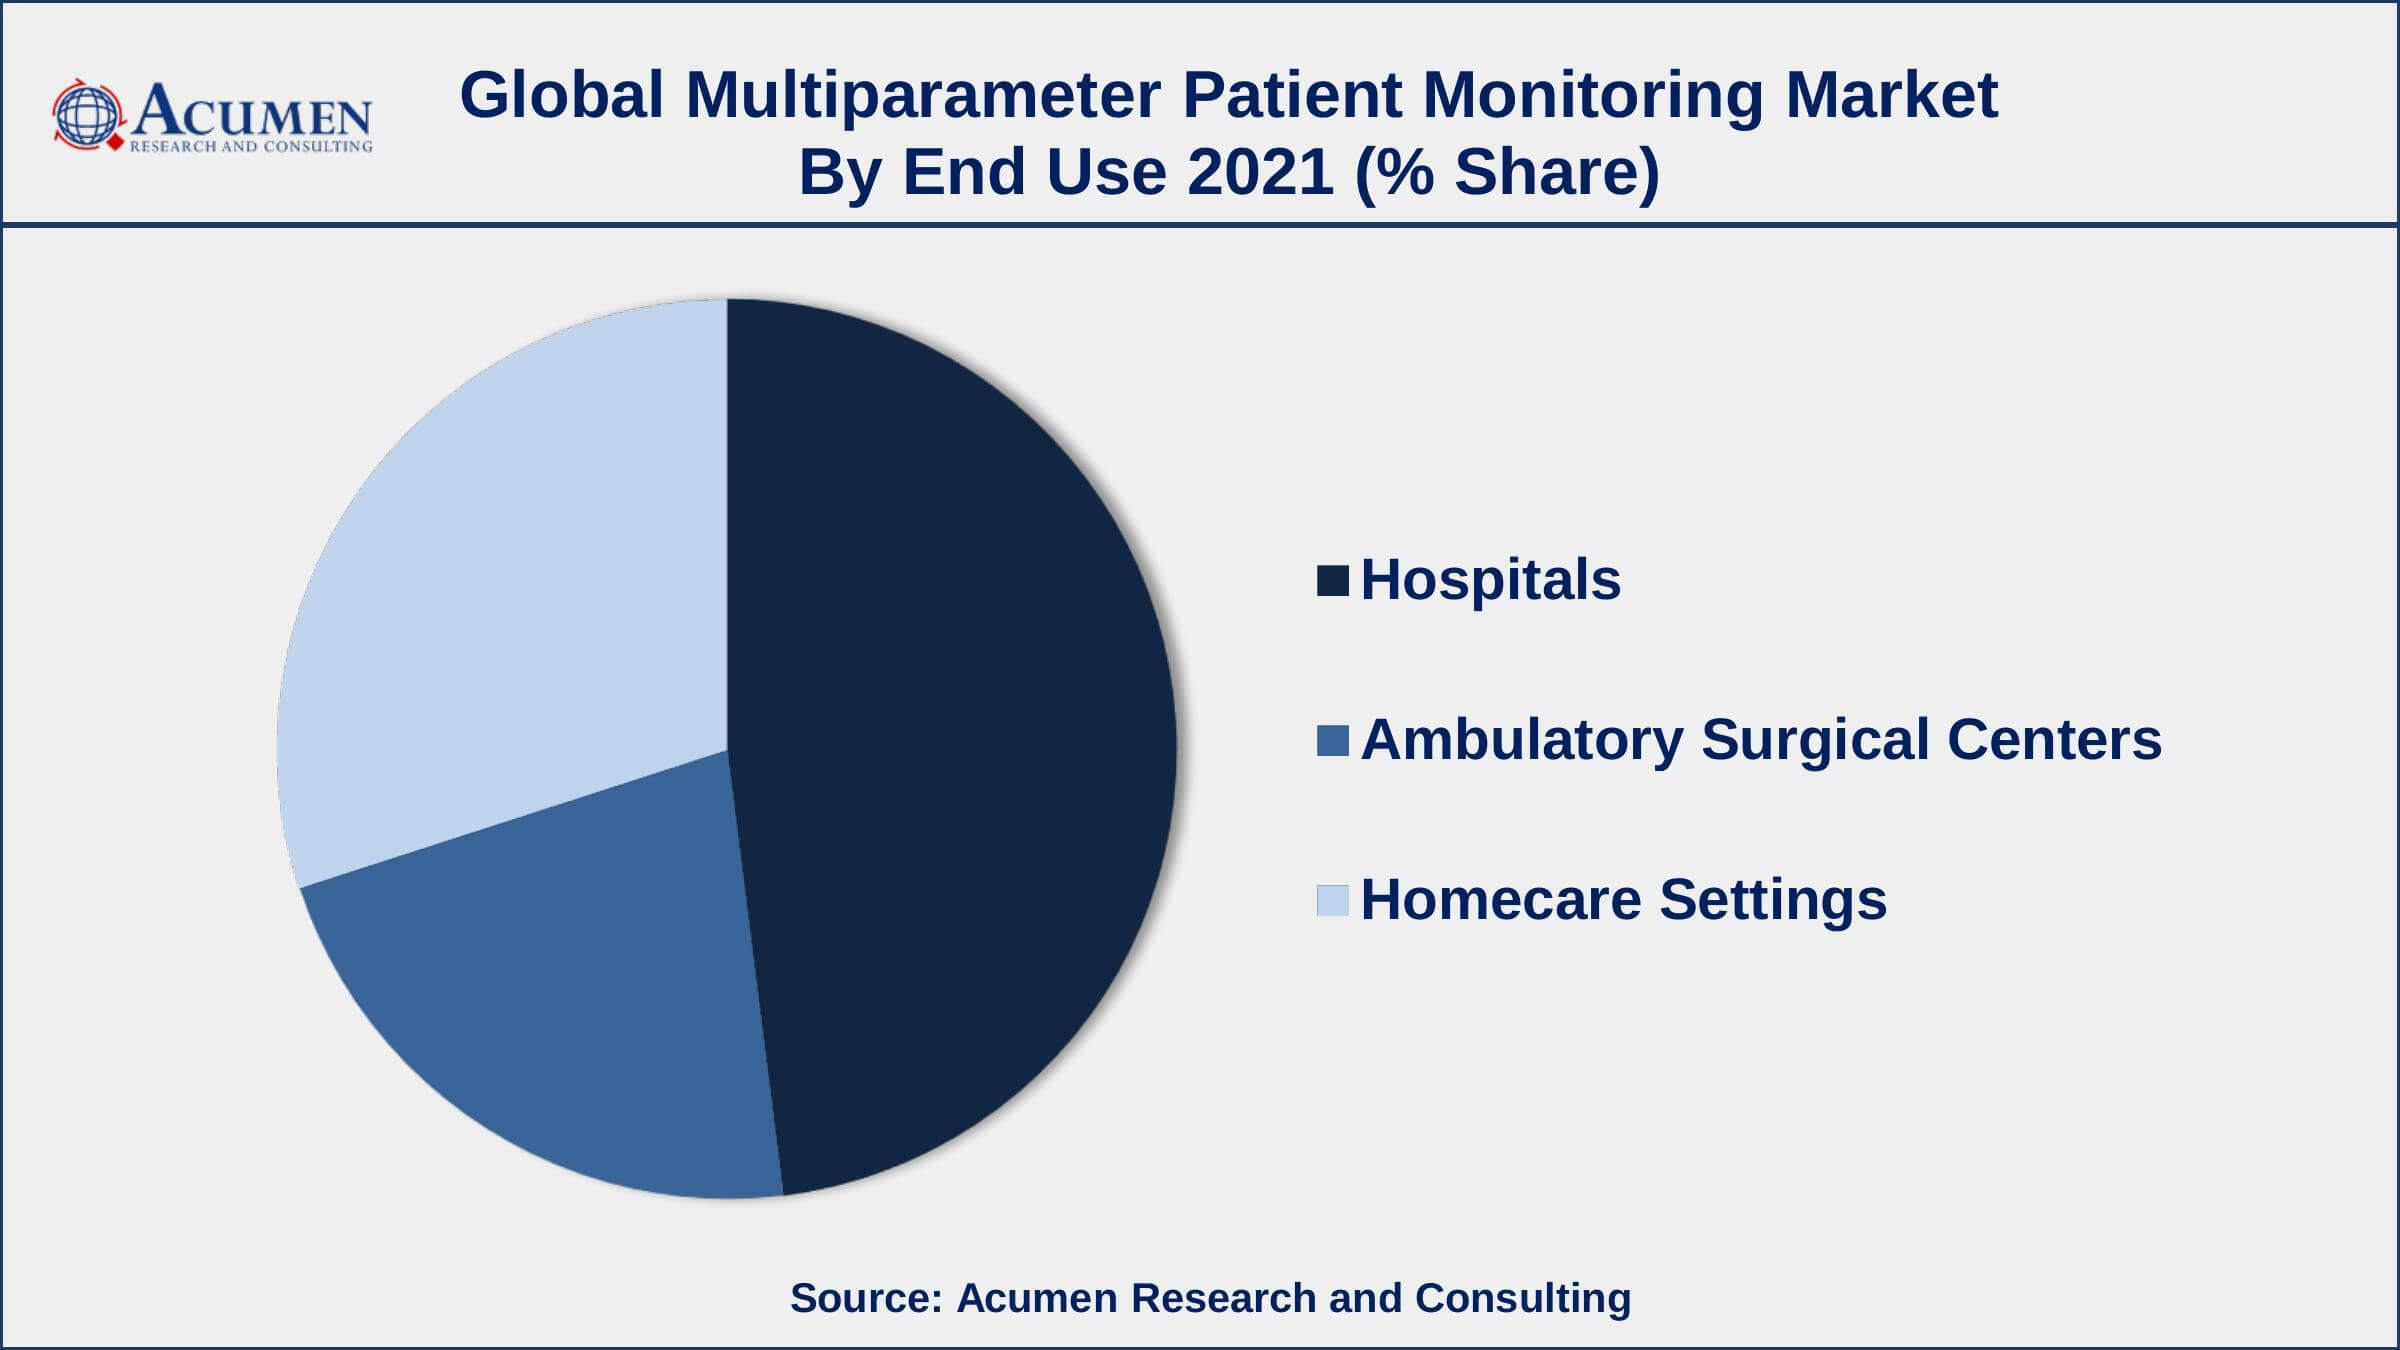 Rising demand for real-time and remote patient monitoring, drives the multiparameter patient monitoring market size